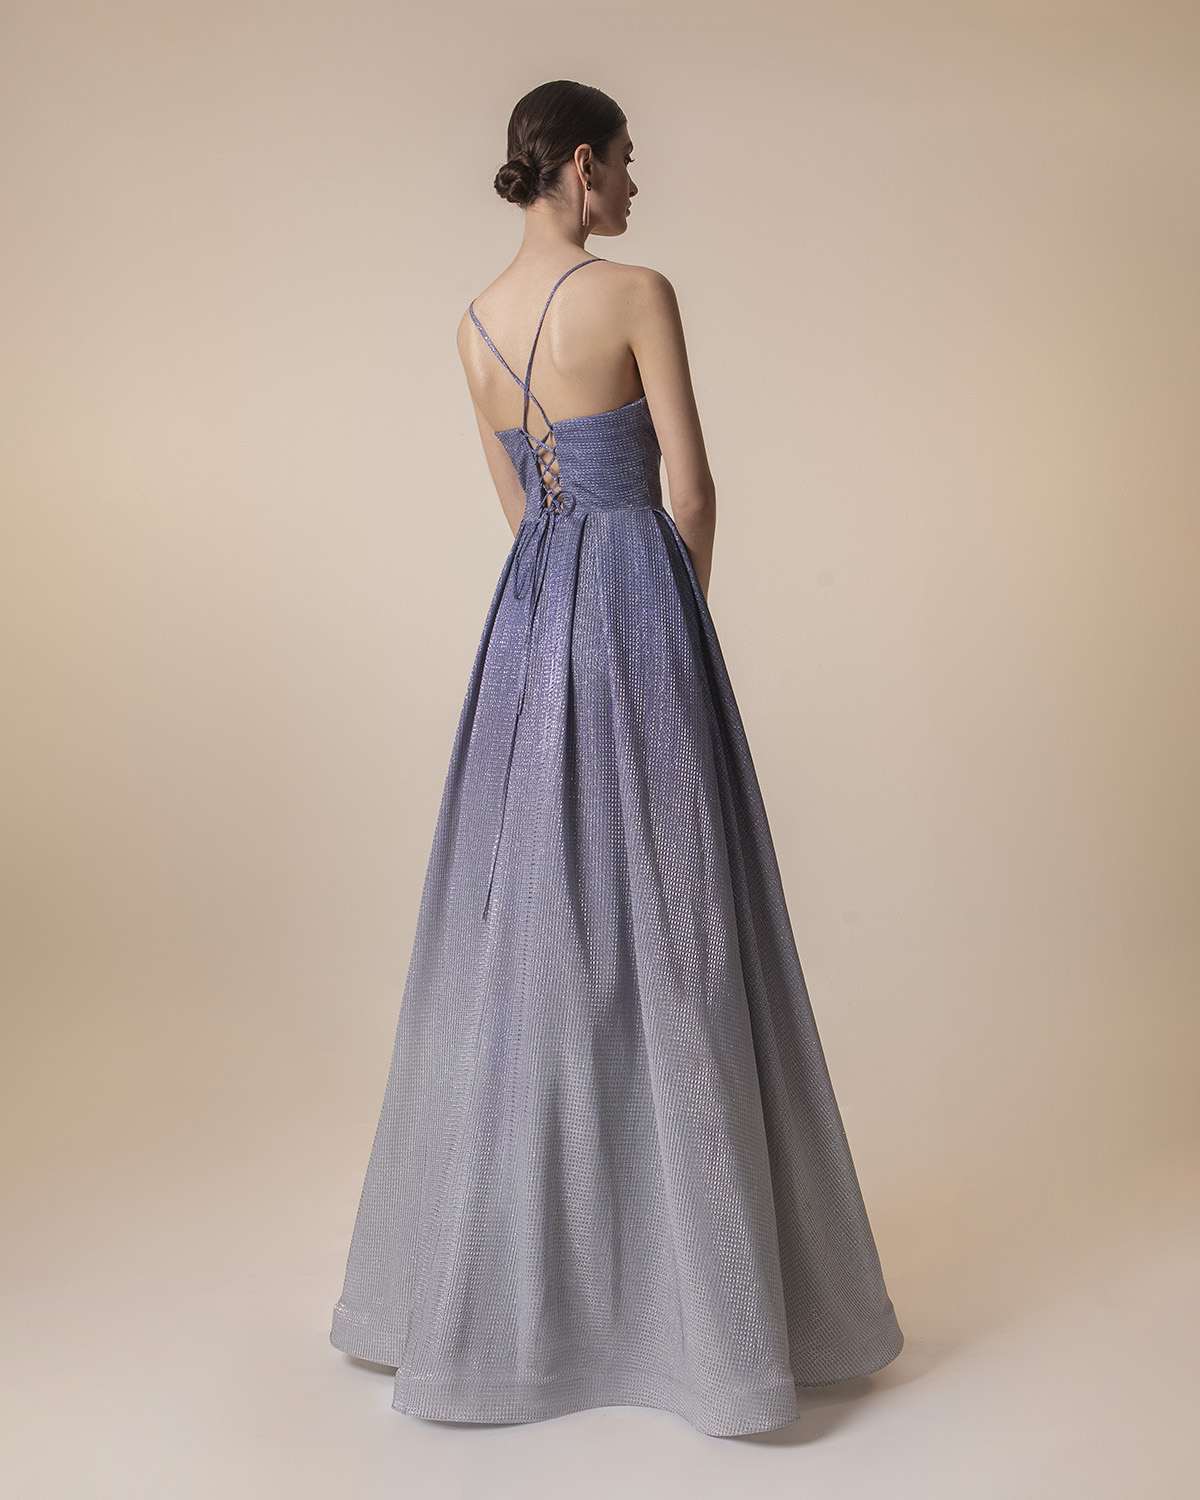 Long ombre evening dress with shining fabric